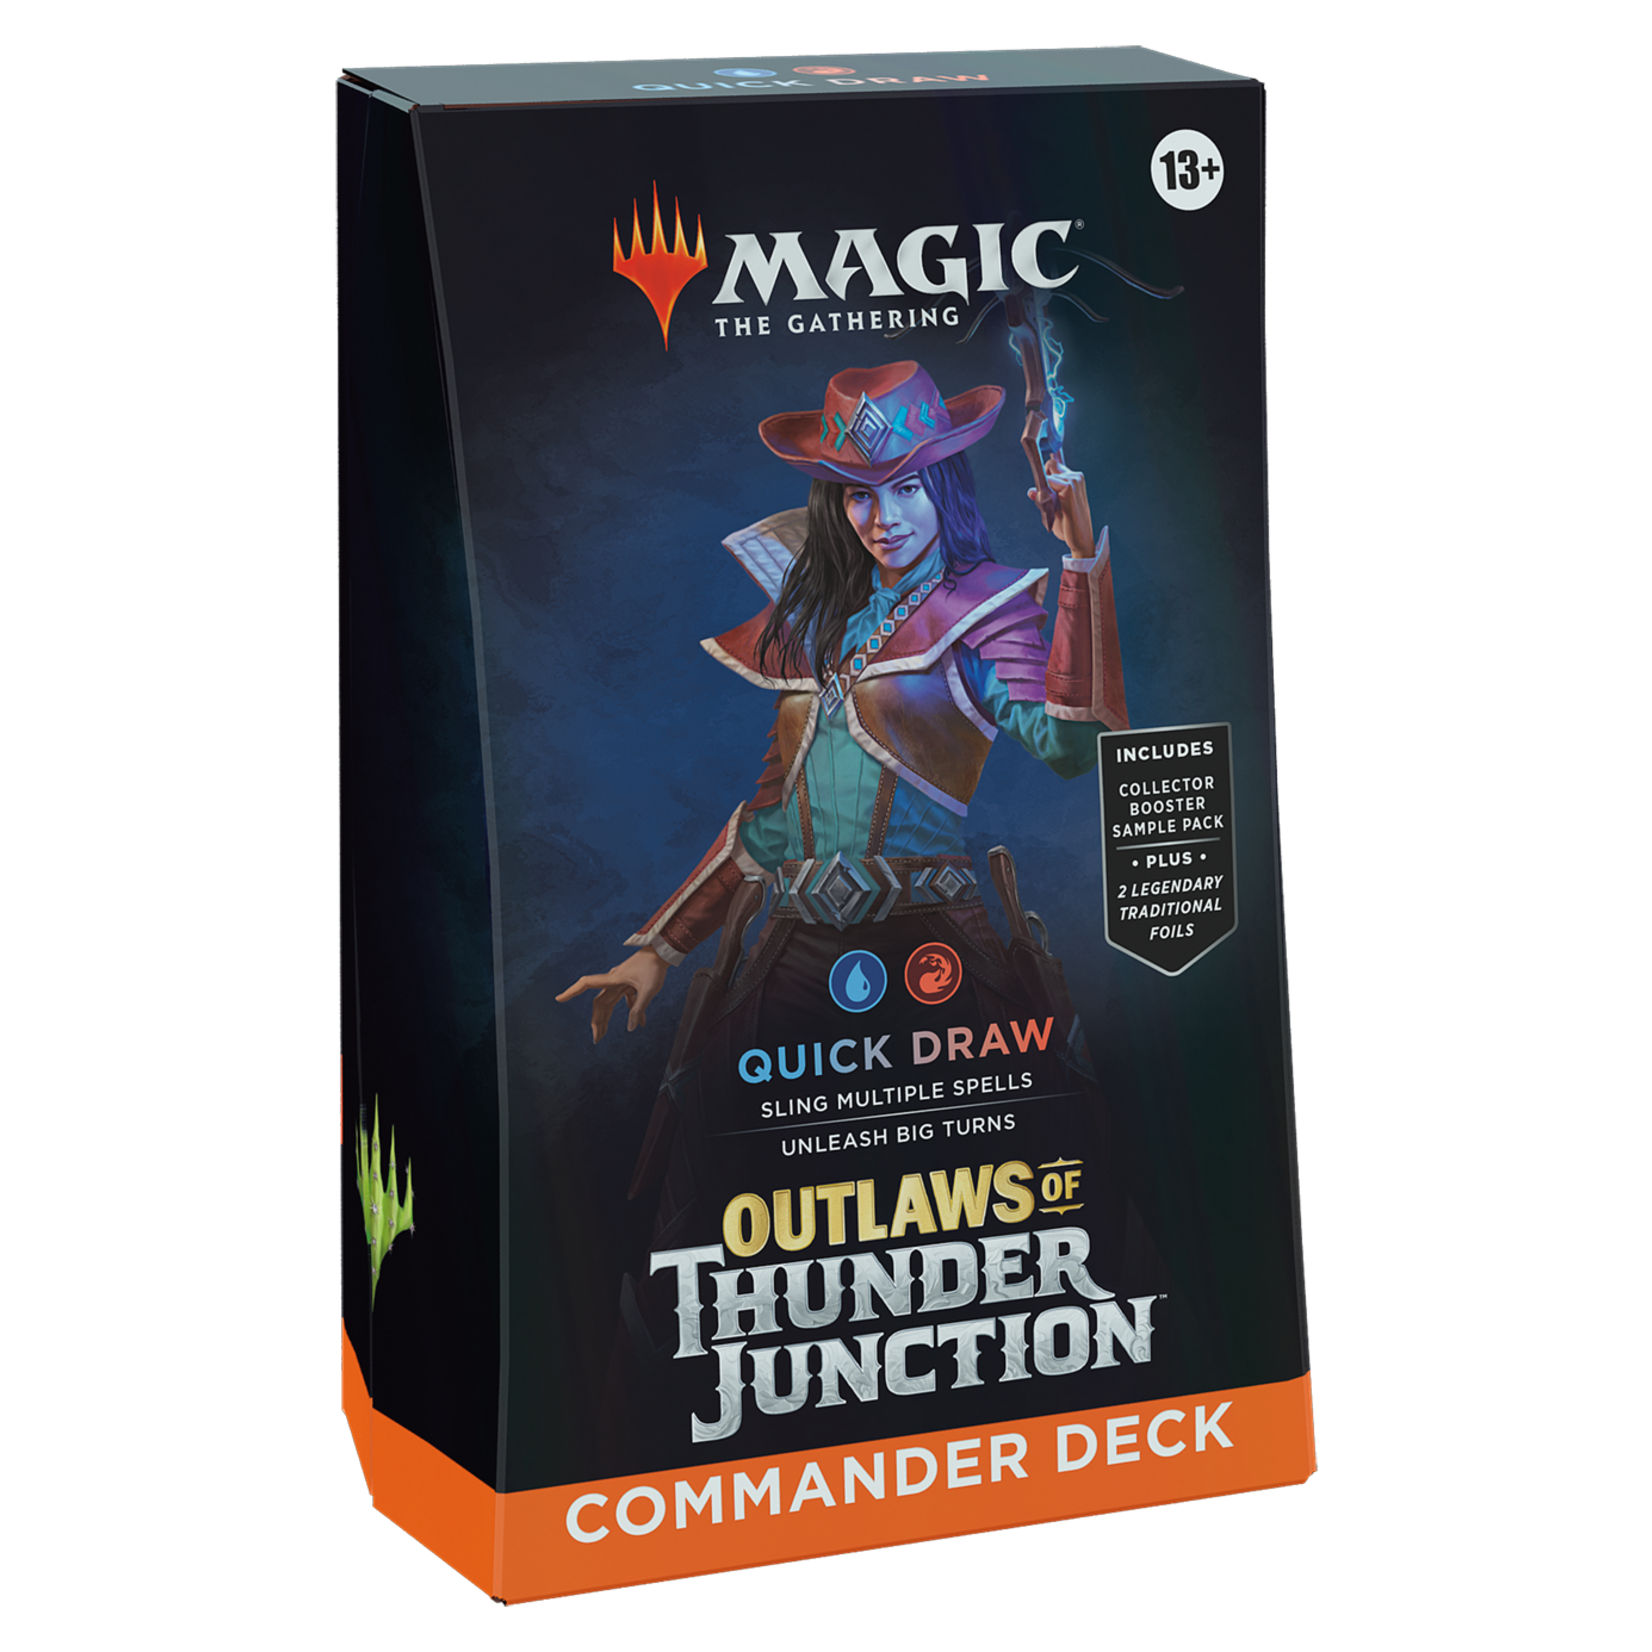 Wizards of the Coast Magic - Outlaws of Thunder Junction Commander Deck "Quick Draw" Blue / Red